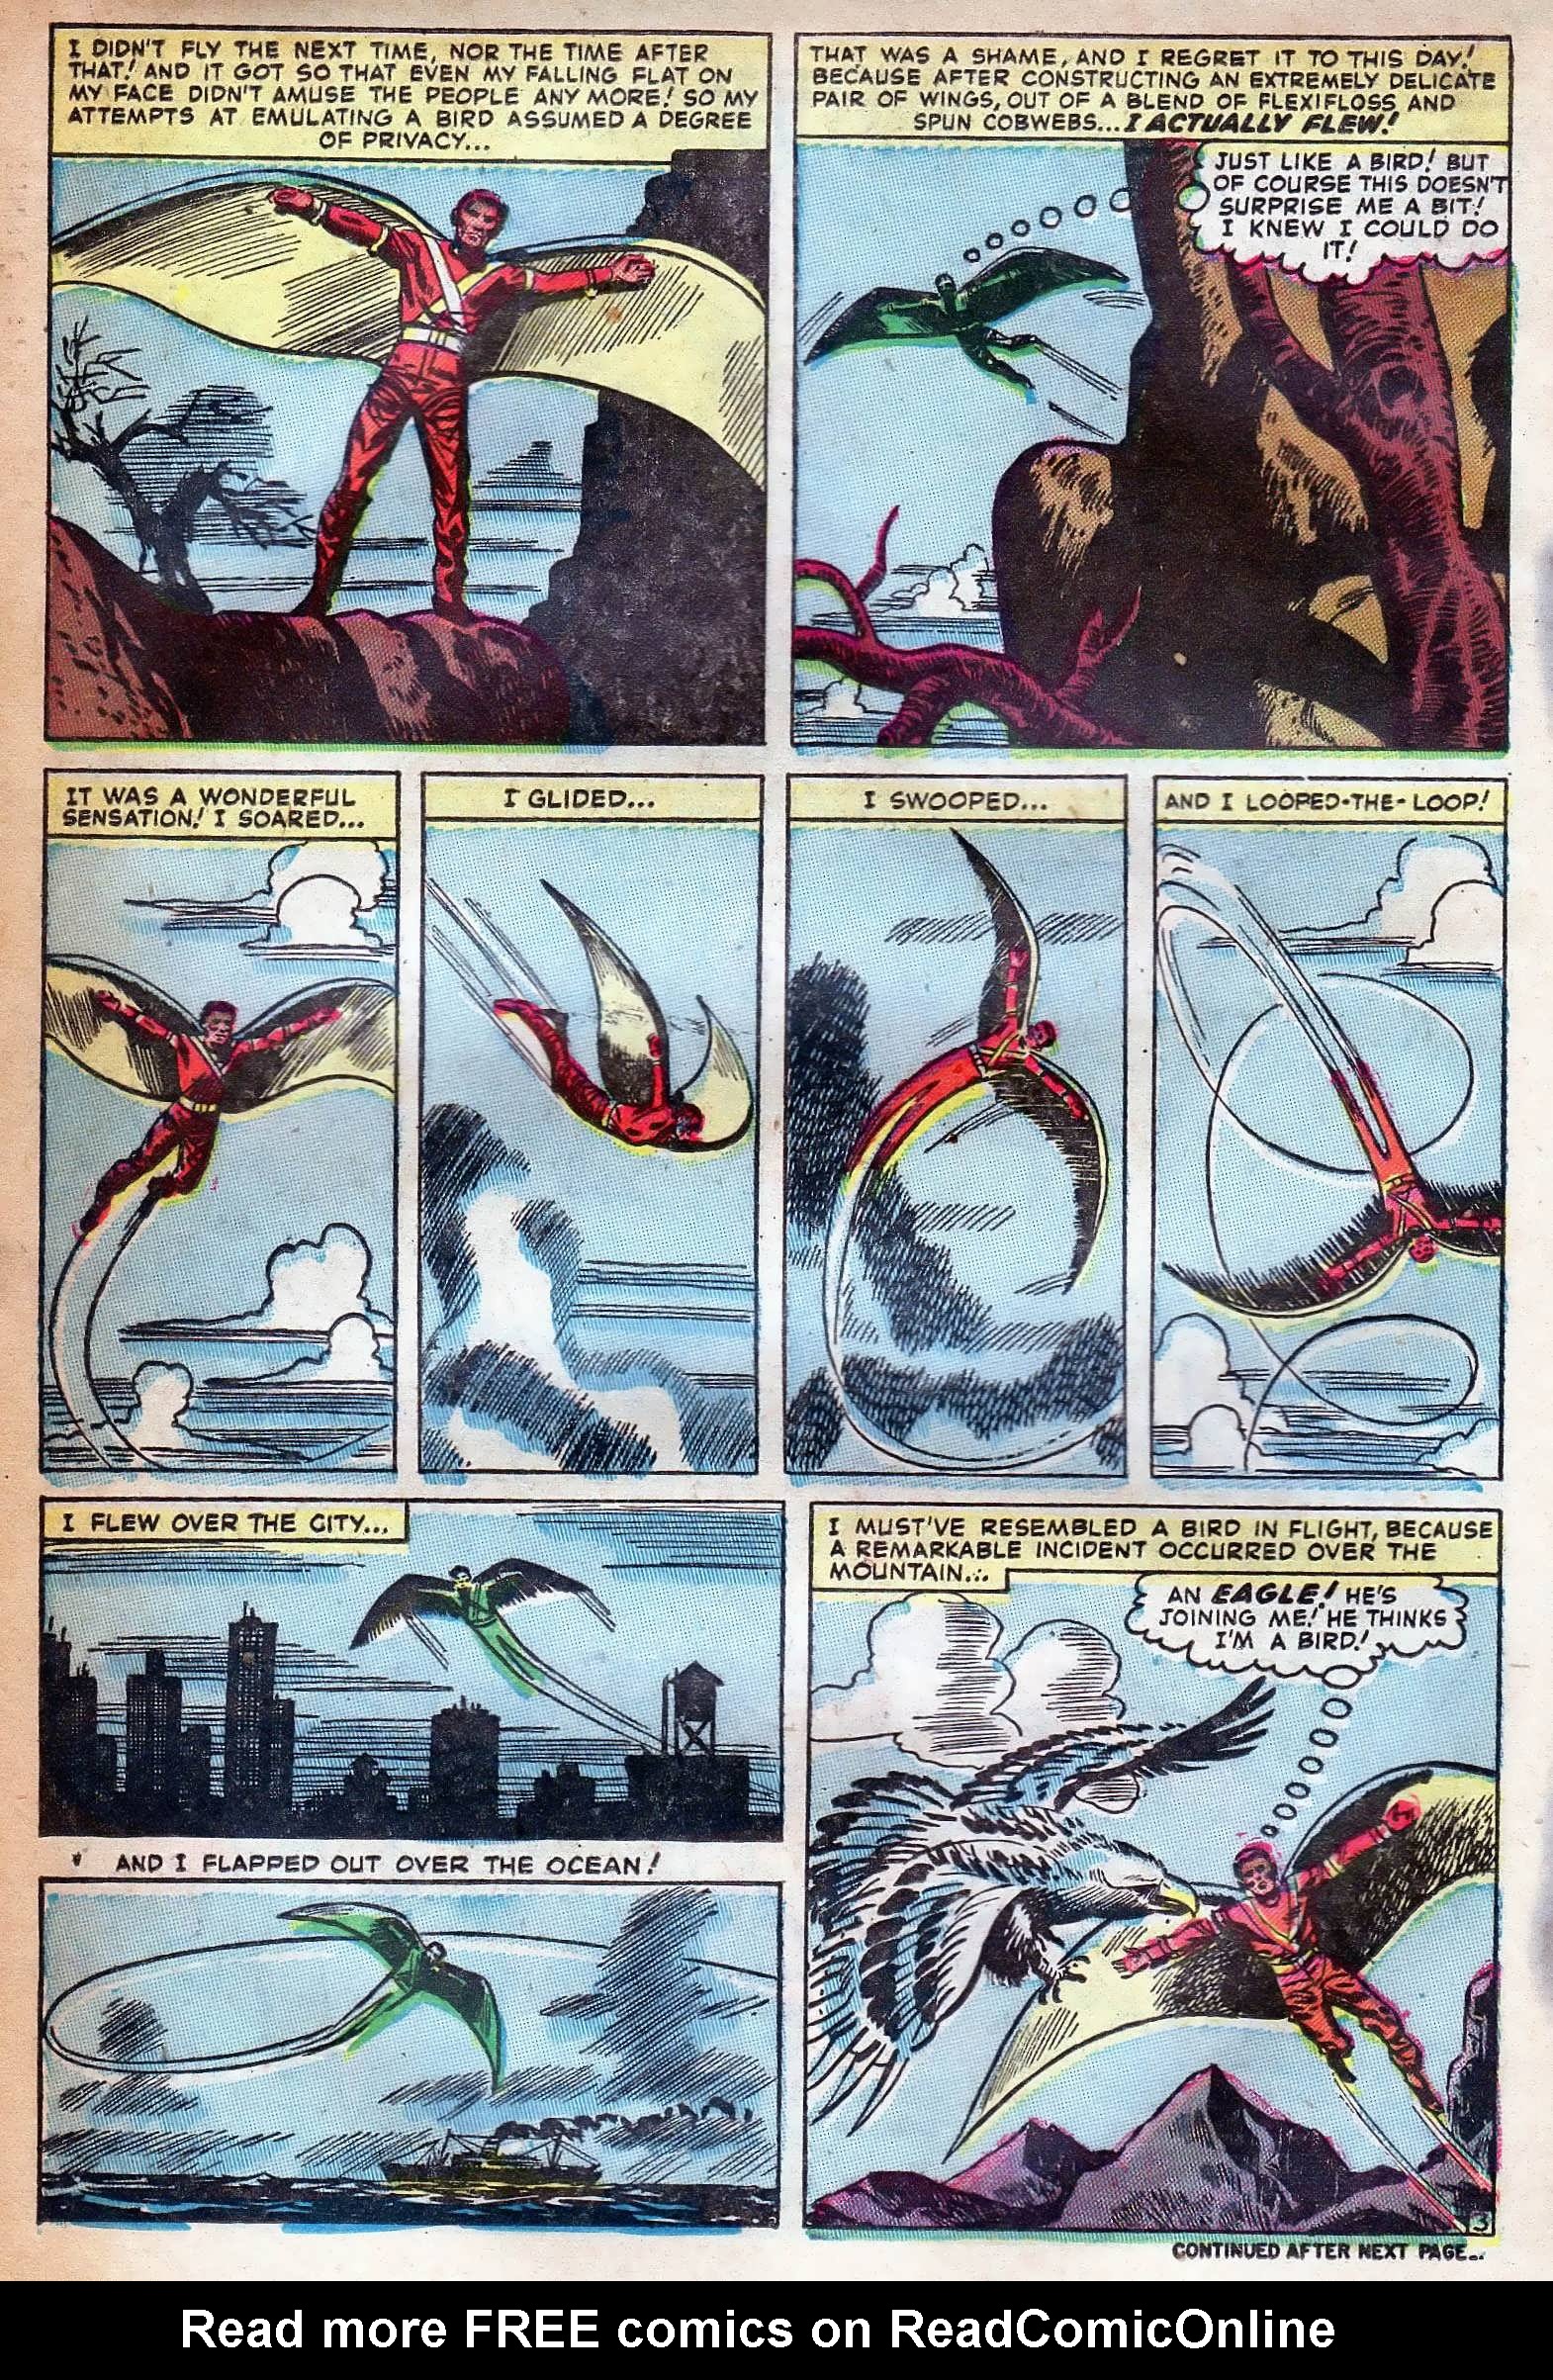 Marvel Tales (1949) 124 Page 17